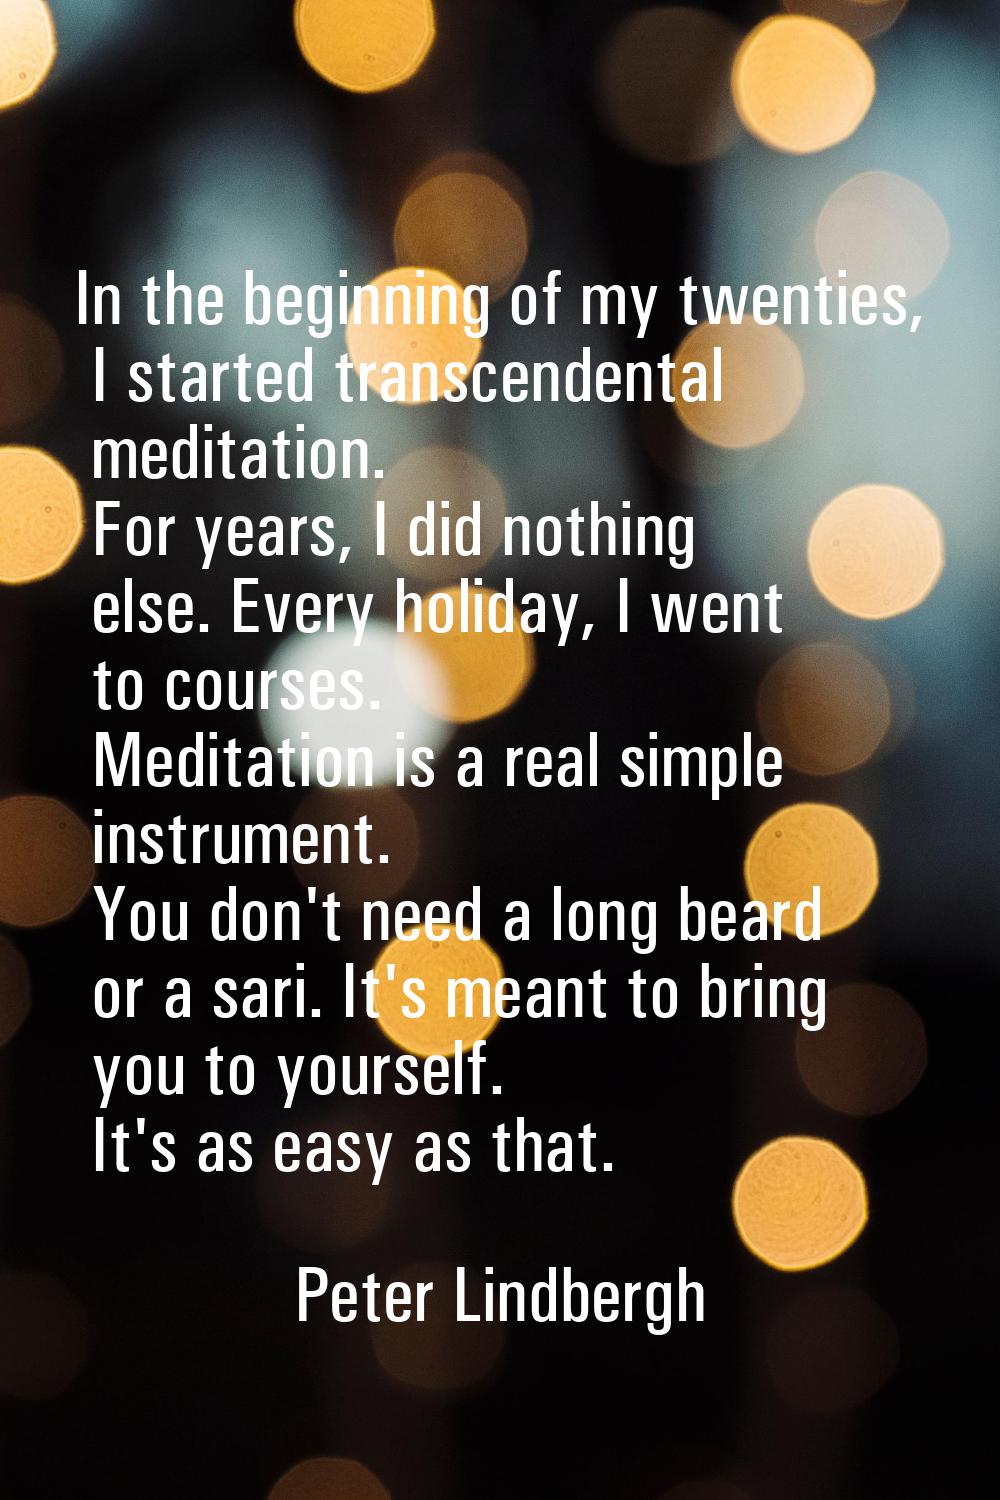 In the beginning of my twenties, I started transcendental meditation. For years, I did nothing else